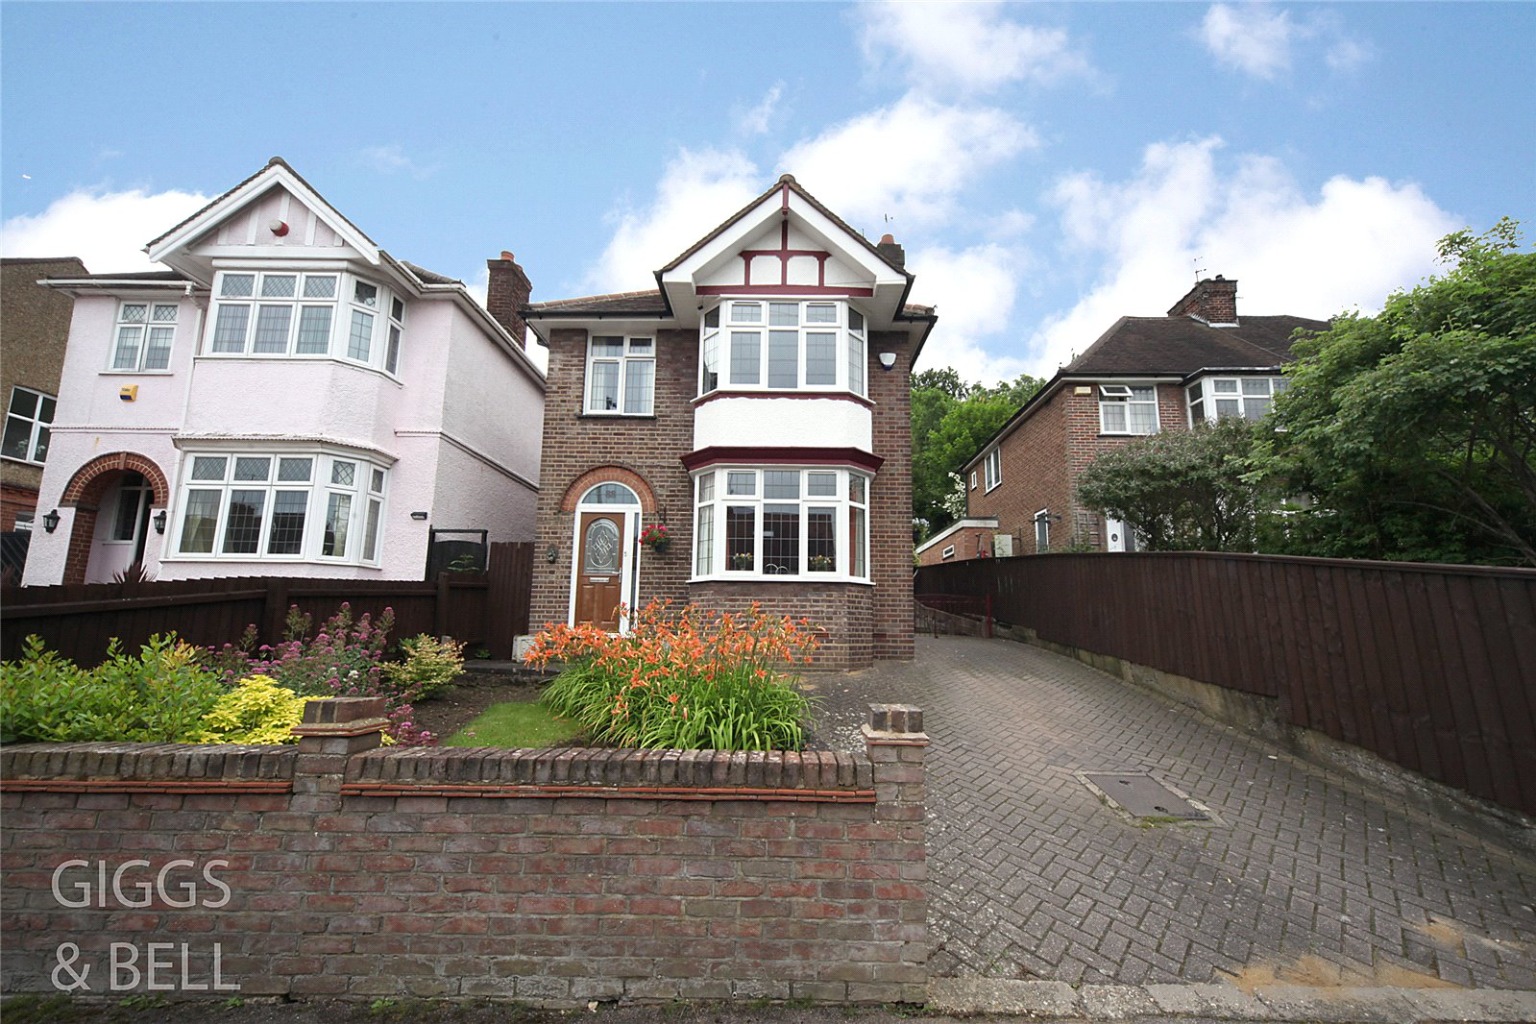 3 bed detached house for sale in Wardown Crescent, Luton - Property Image 1